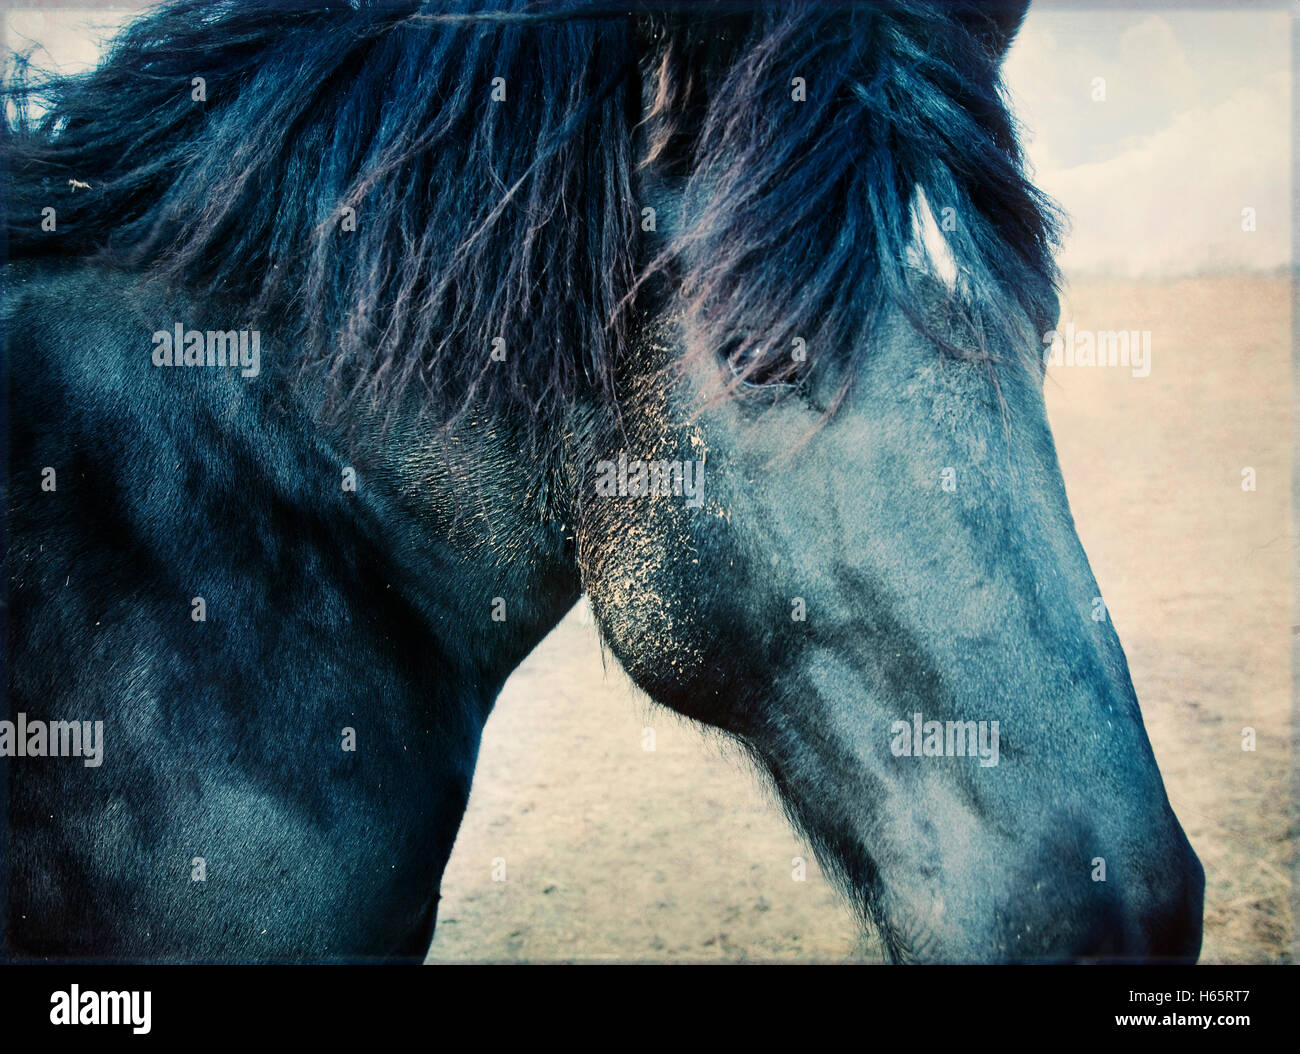 Blue horse head with side glance at camera Stock Photo